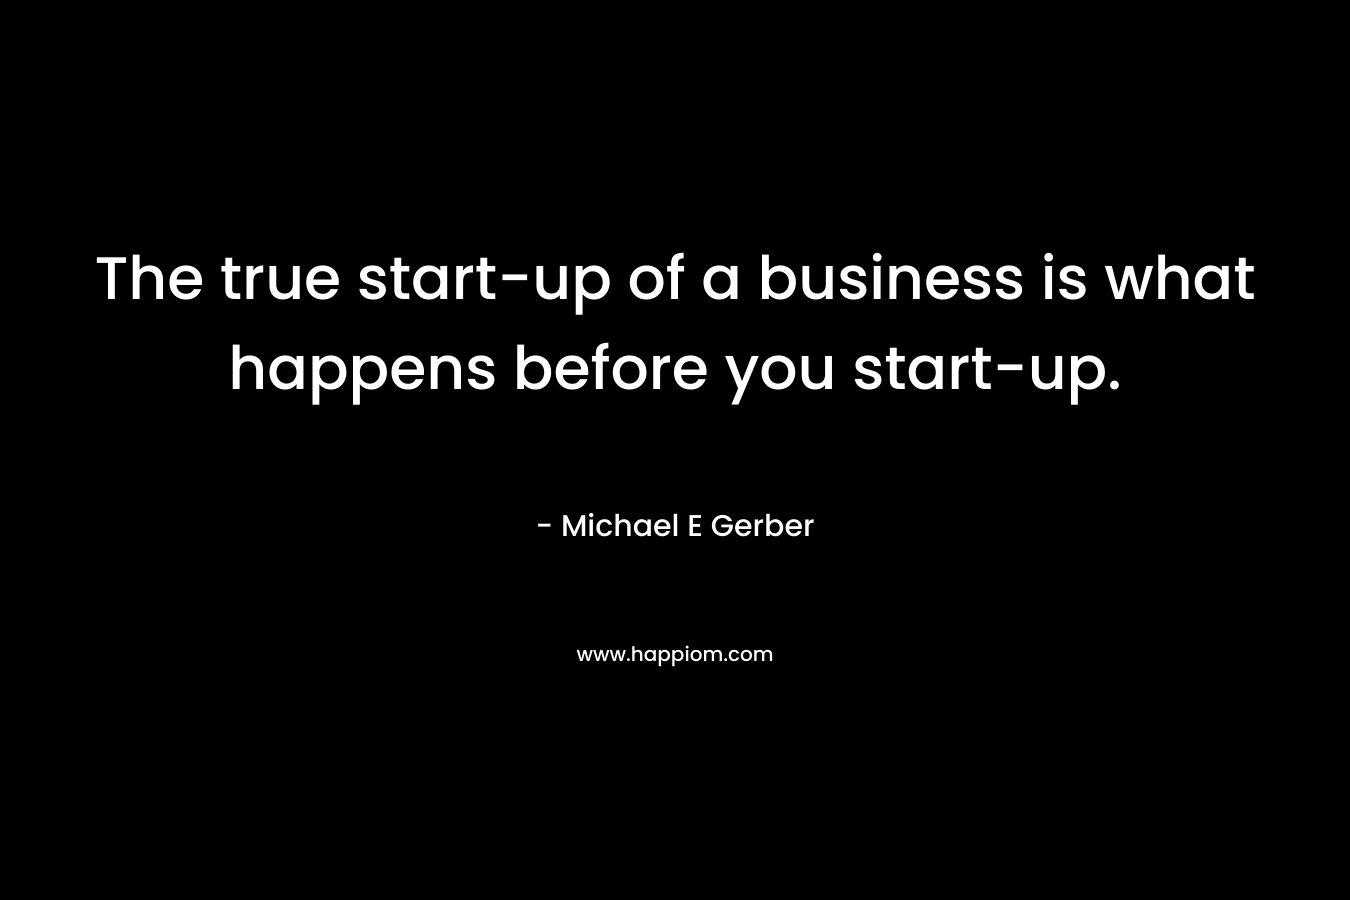 The true start-up of a business is what happens before you start-up. – Michael E Gerber